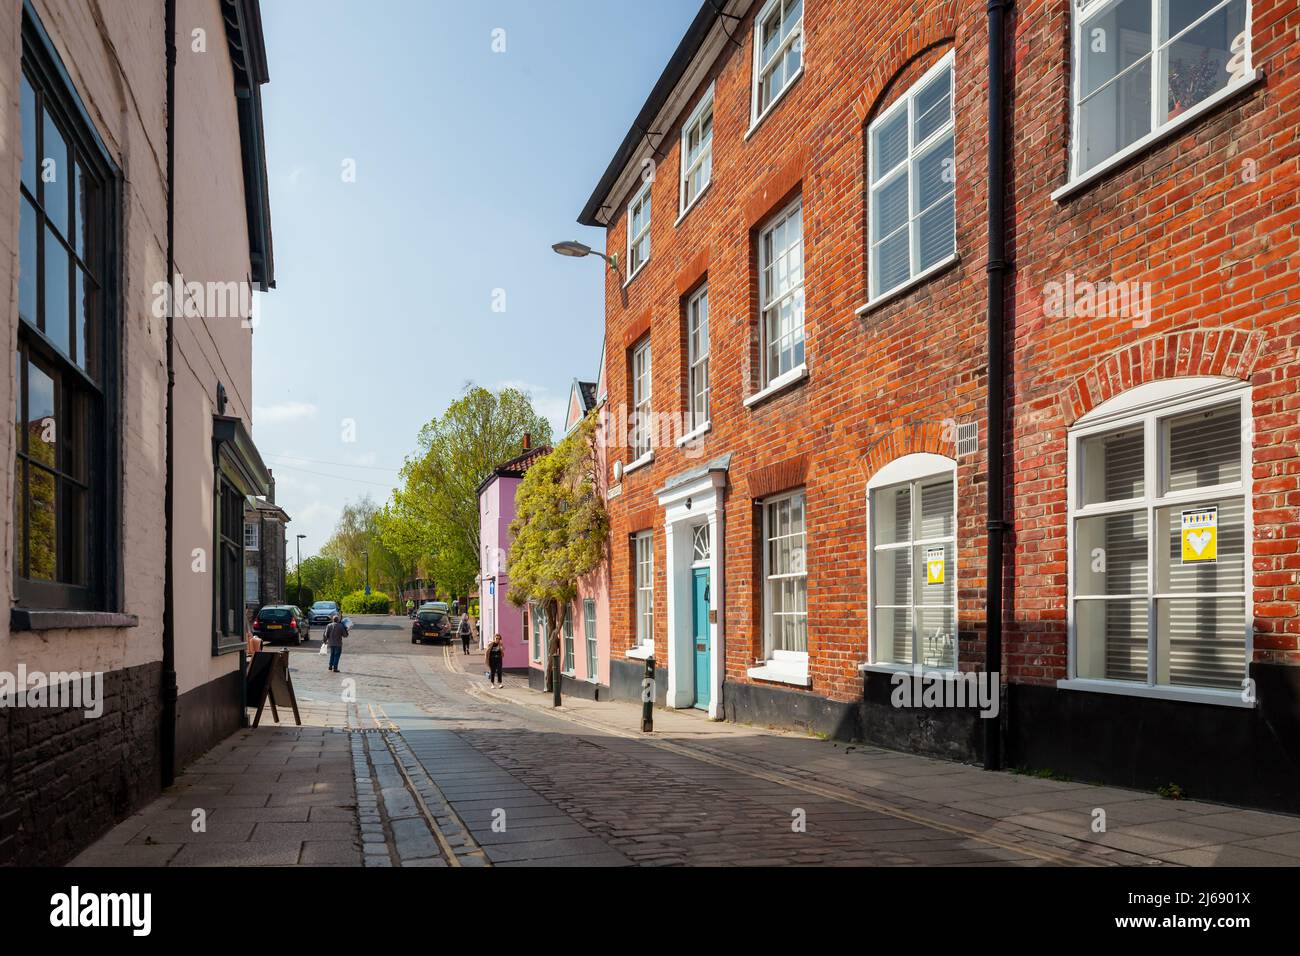 Spring afternoon on Pottergate in Norwich city centre, Norfolk, England. Stock Photo